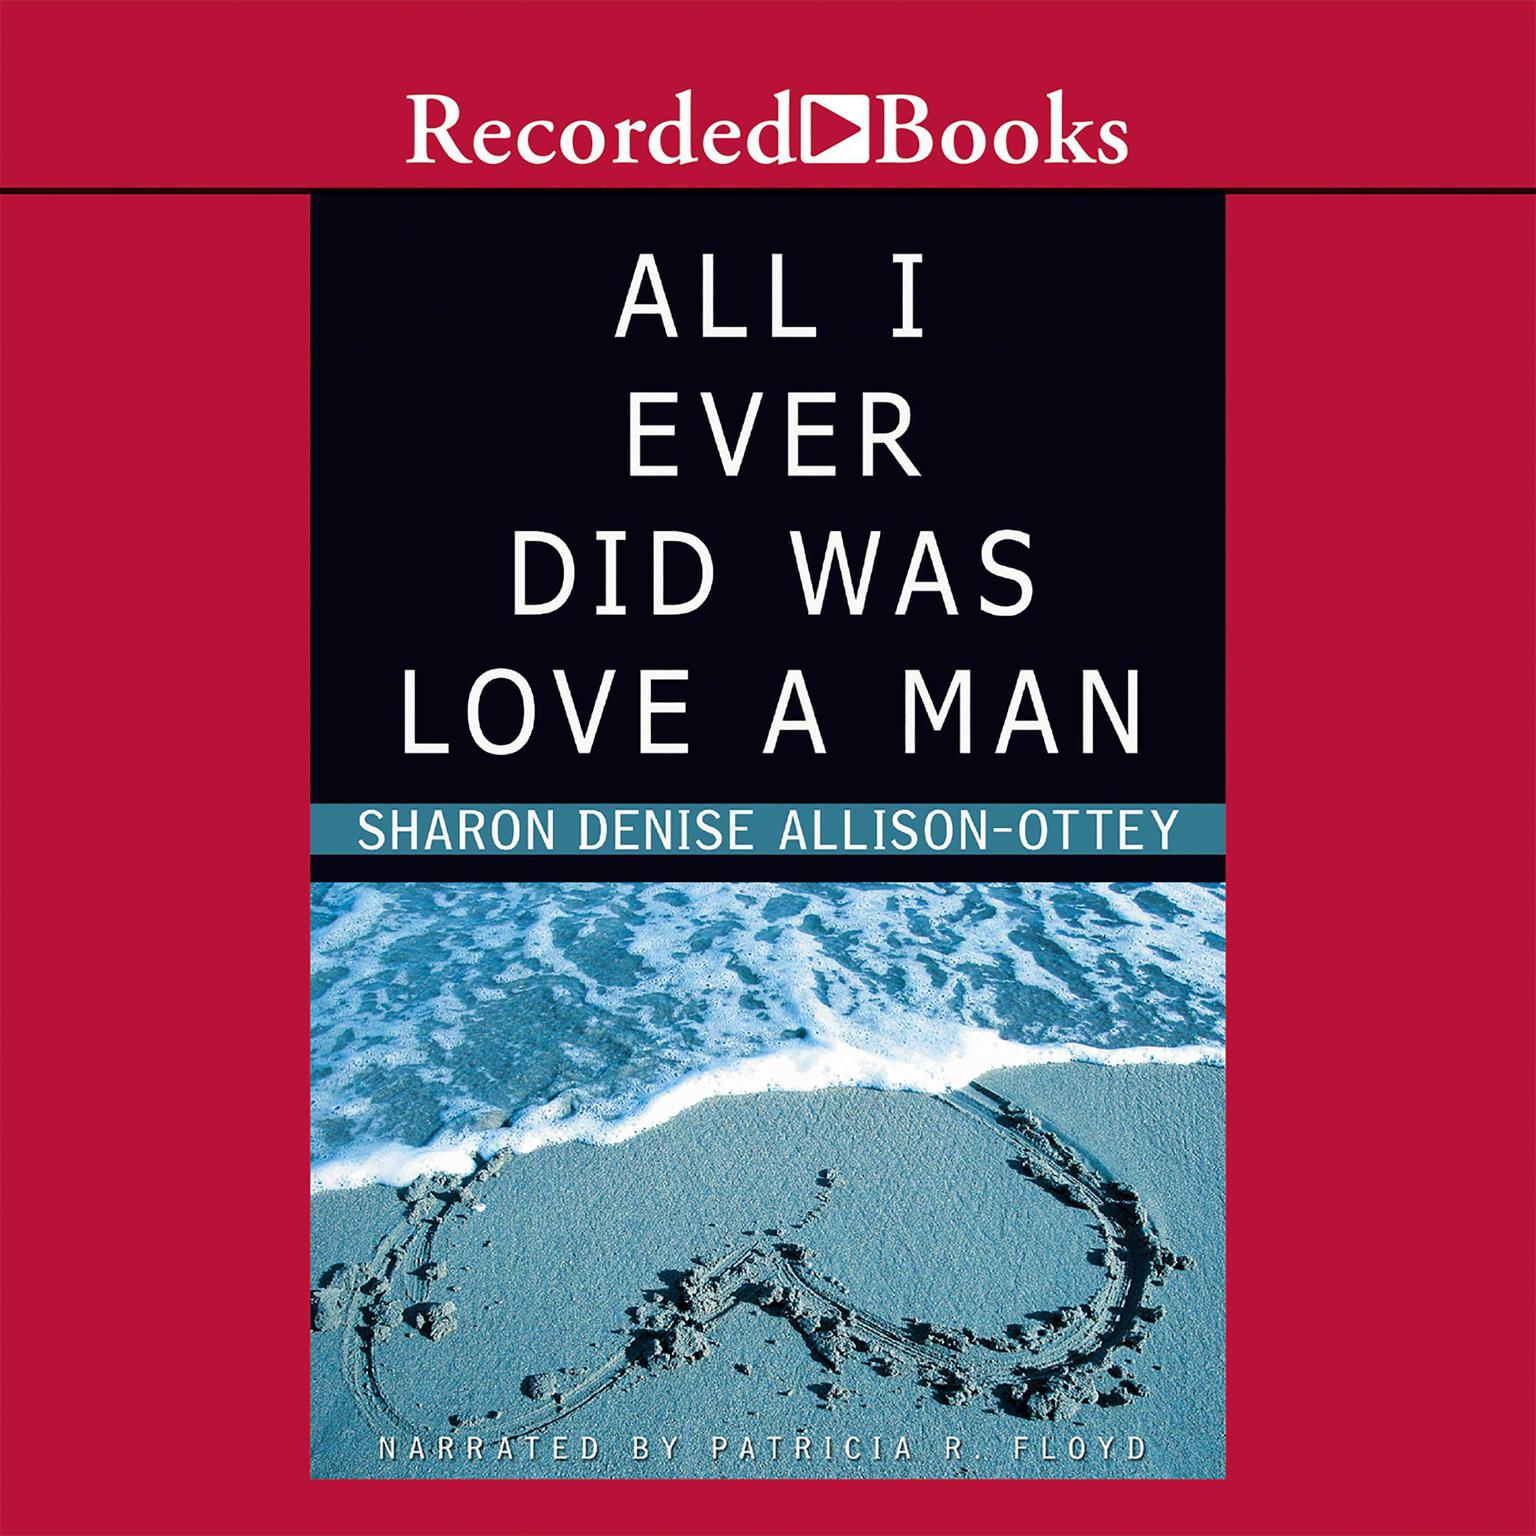 All I Ever Did was Love a Man Audiobook, by Sharon Denise Allison-Ottey